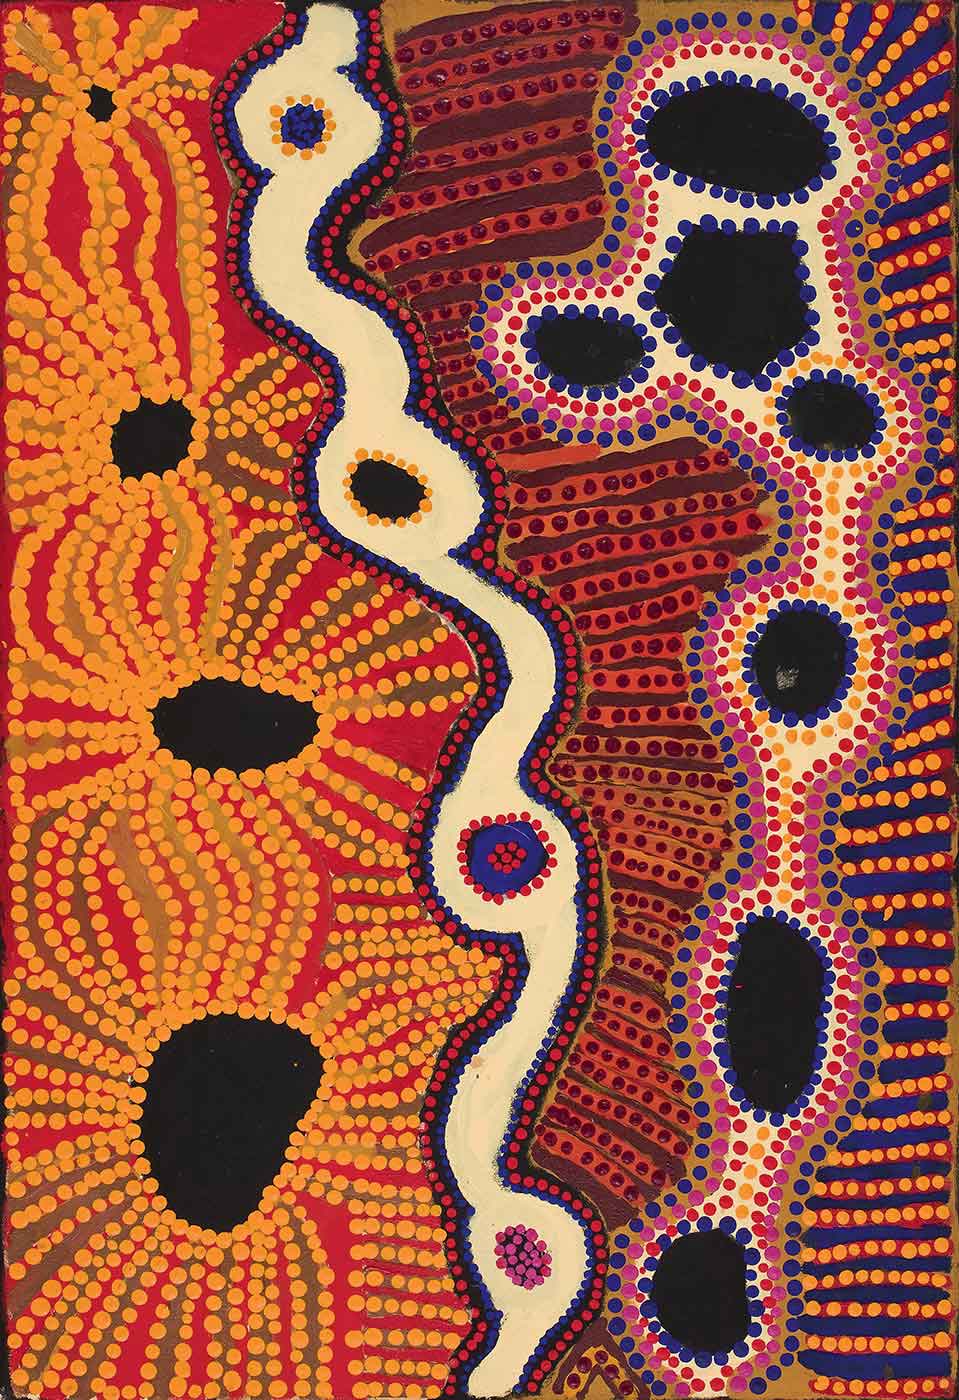 A painting on brown linen with a wavy cream line punctuated with three blue and one black circle which are decorated with dots in yellow, red or purple, down the centre. The Wavy line is edged with dots in red on a blue-black underlay. To the left of the painting are for black round shapes graduating in size from top to bottom. These black shapes have yellow dotted lines radiating out from them over a red and yellow-brown background. The right side of the painting has seven black rounded shapes with blue dotted edges surrounded by a cream colour covered in red and yellow dots. Flanking both sides of this are horizontal stripes and rows of dots in red and brown, and also in blue and yellow. - click to view larger image